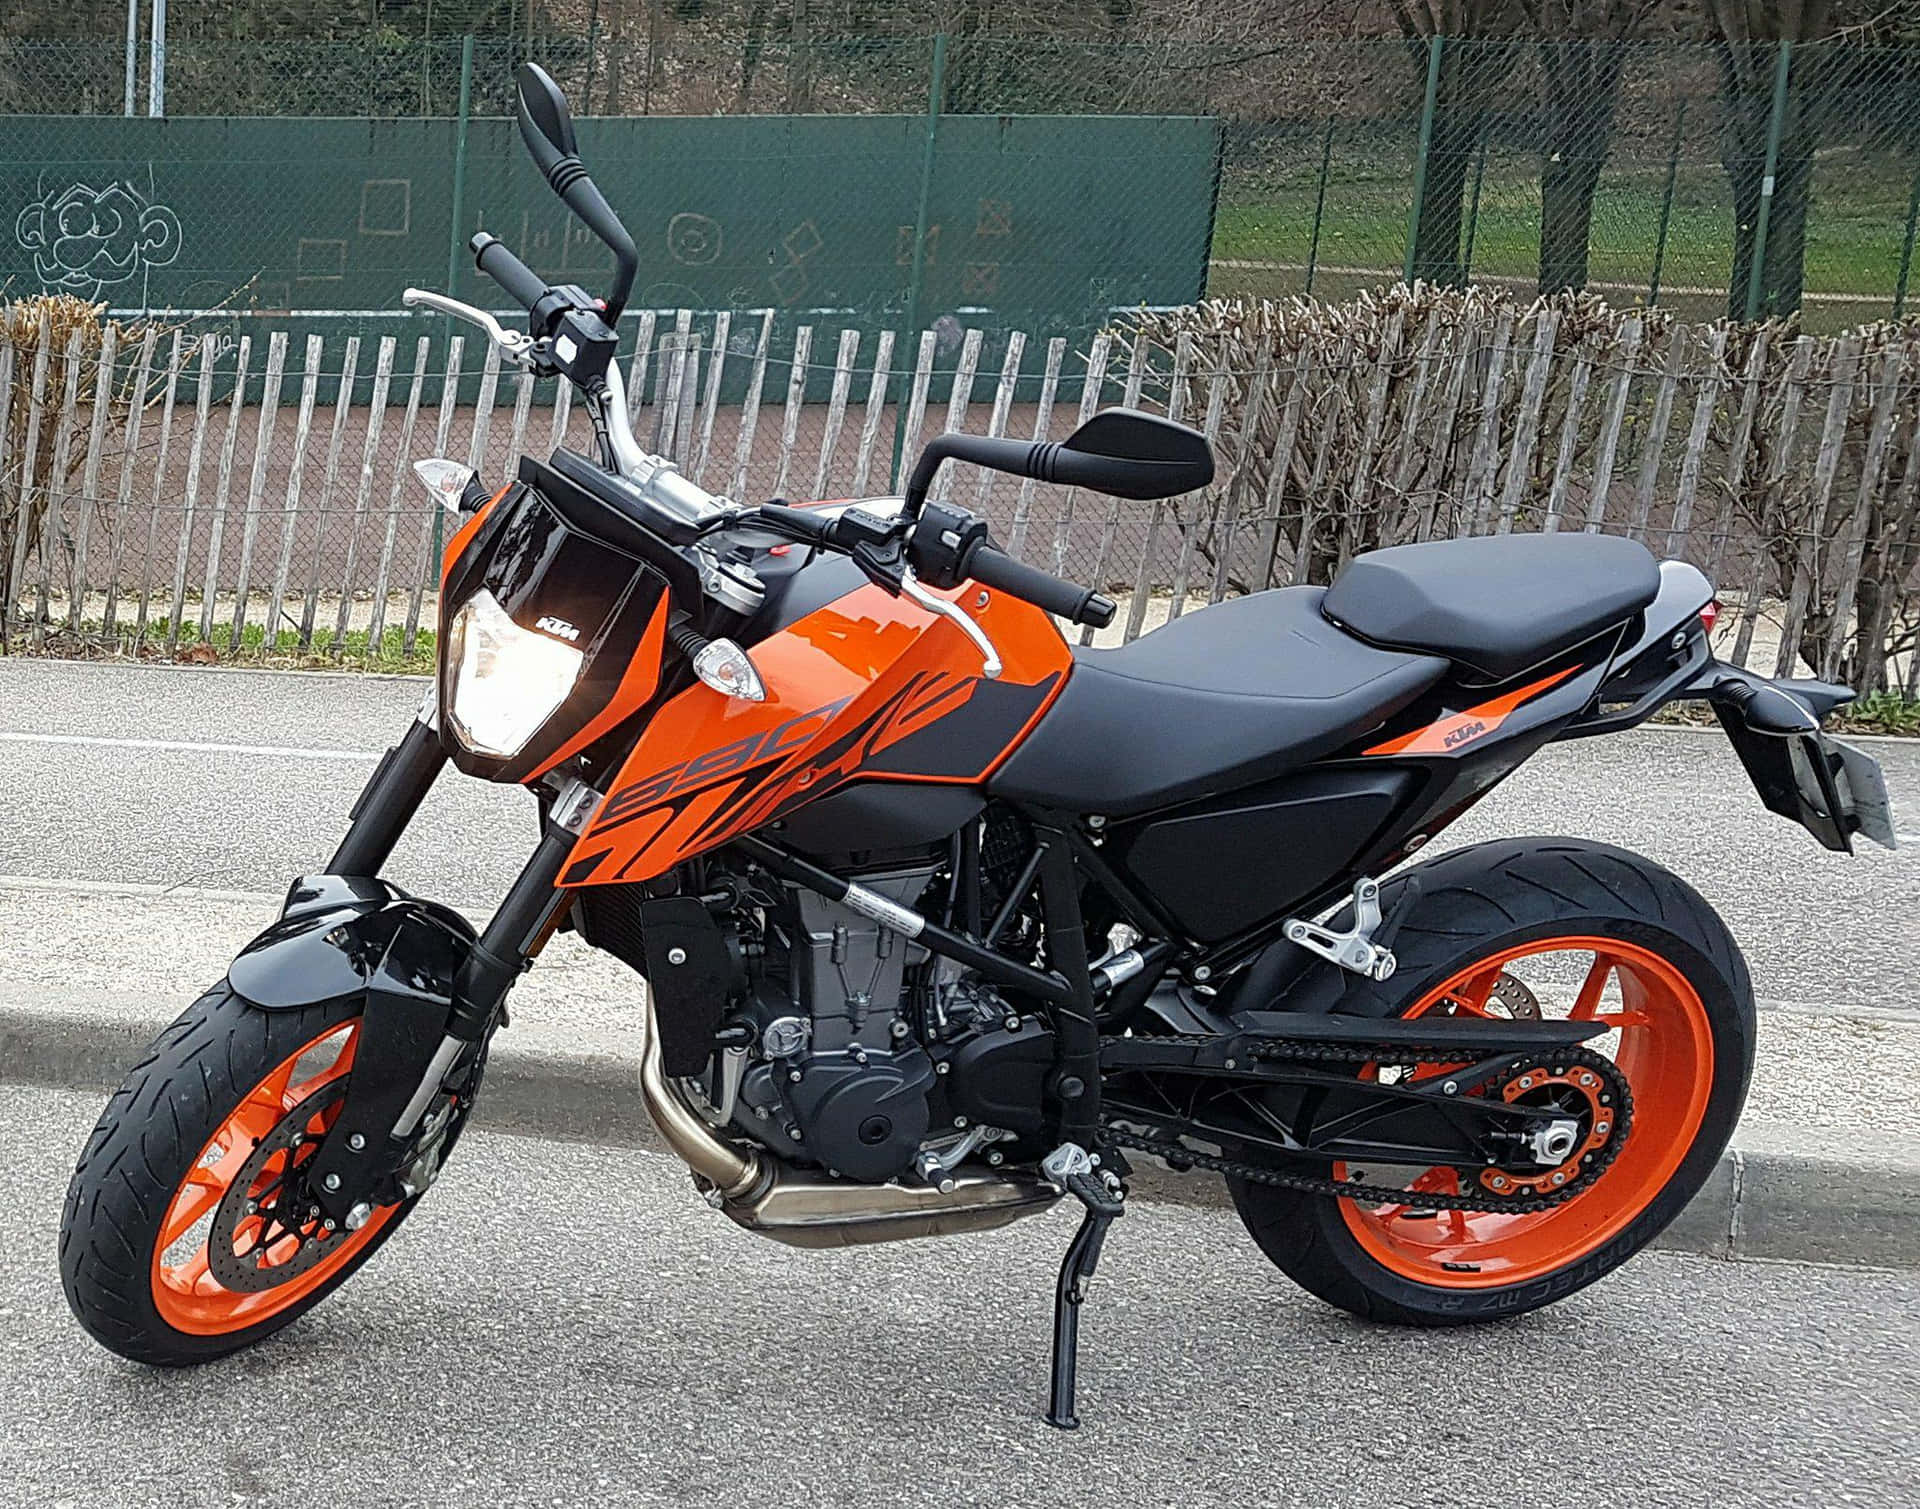 Parked Ktm Duke 690 Motorcycle Picture